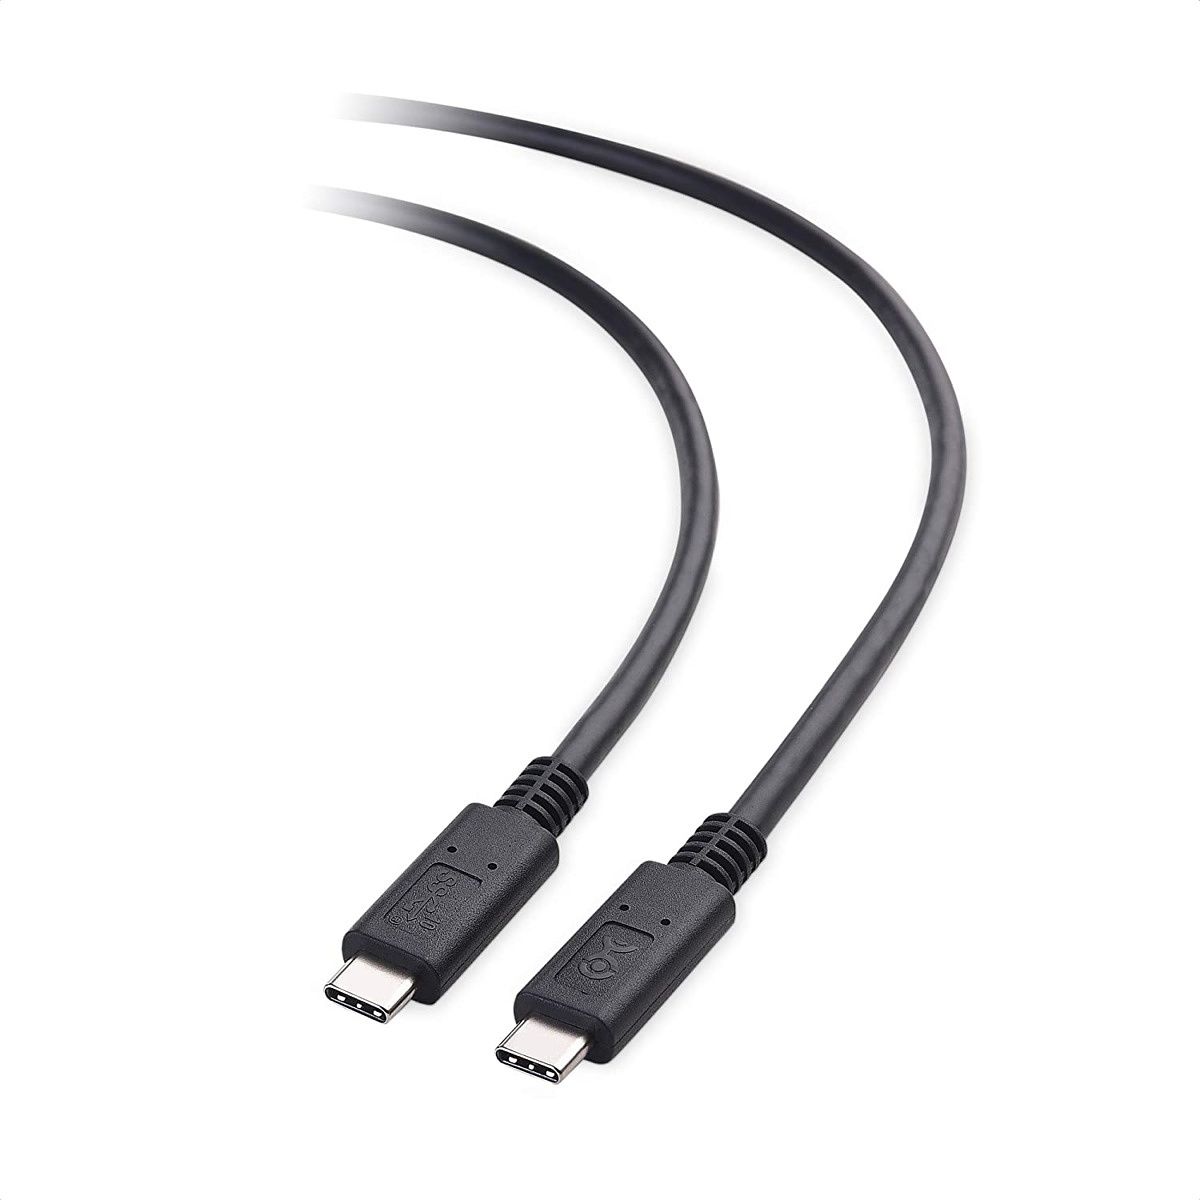 This USB cable offers ultra-fast speeds for both charging and data transfer, at up to 100W and 10Gbps respectively.